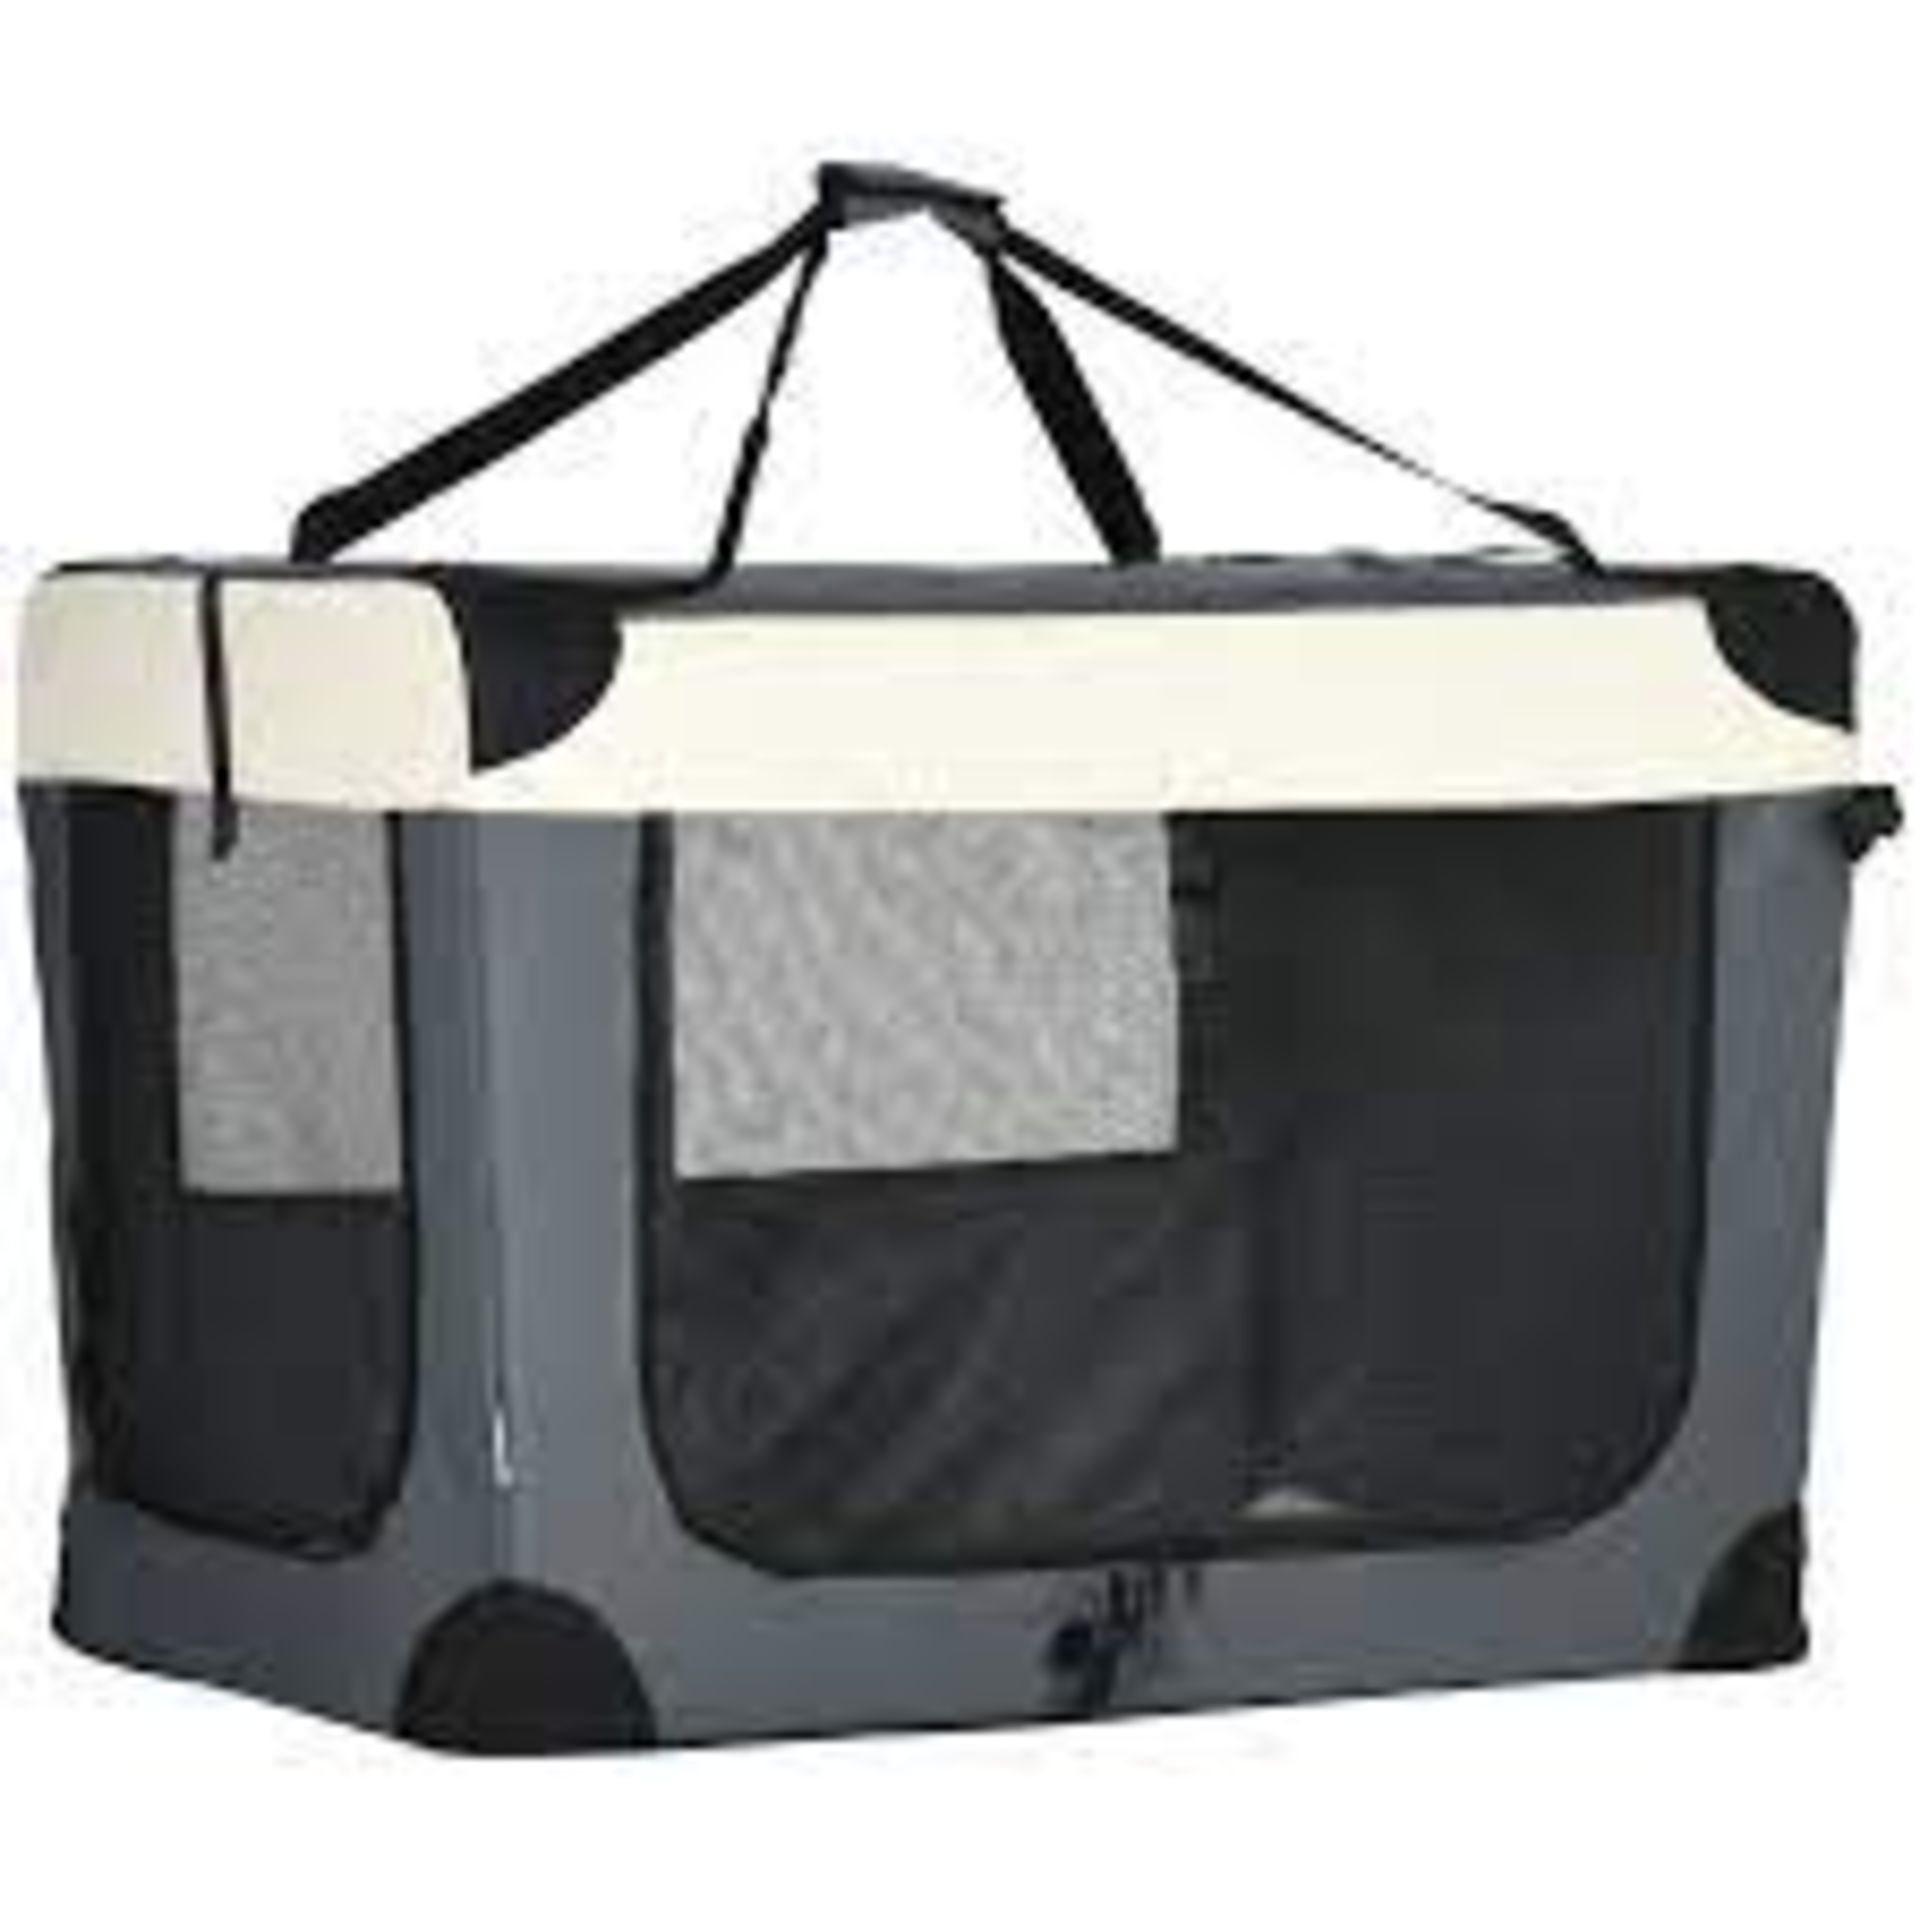 PawHut 91cm Foldable Pet Carrier, with Cushion, for Large Dogs and Cats - Grey - SR4